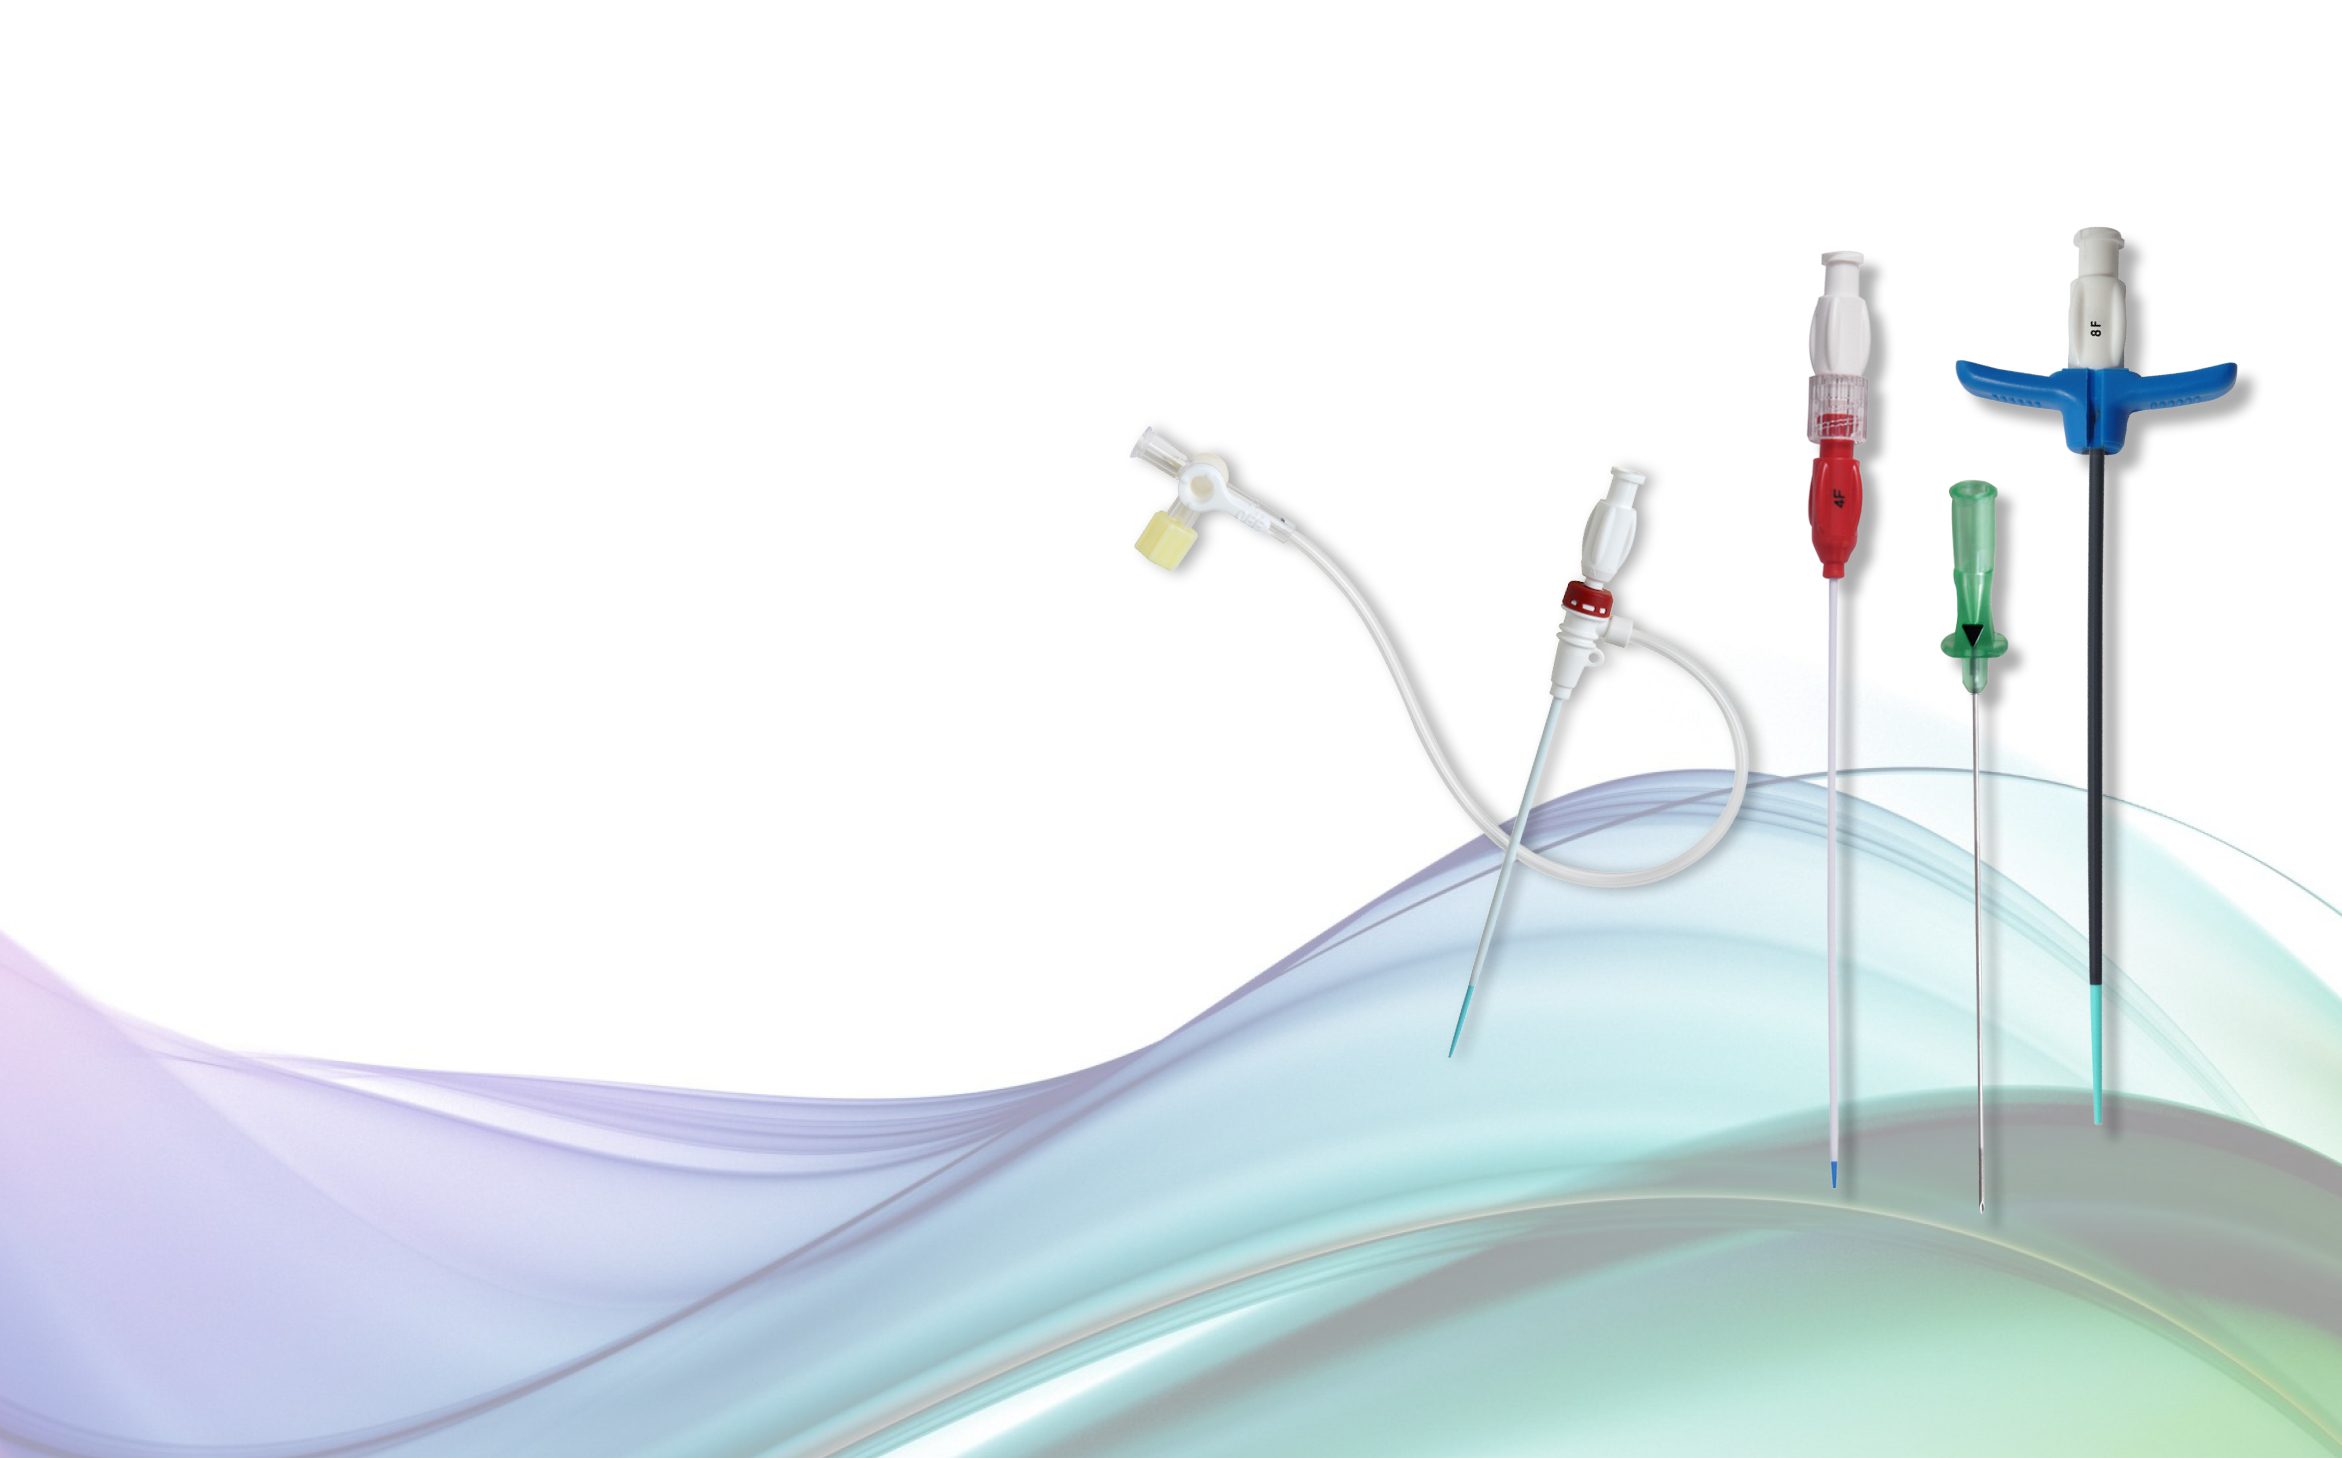 Interventional Sheaths and Introducers